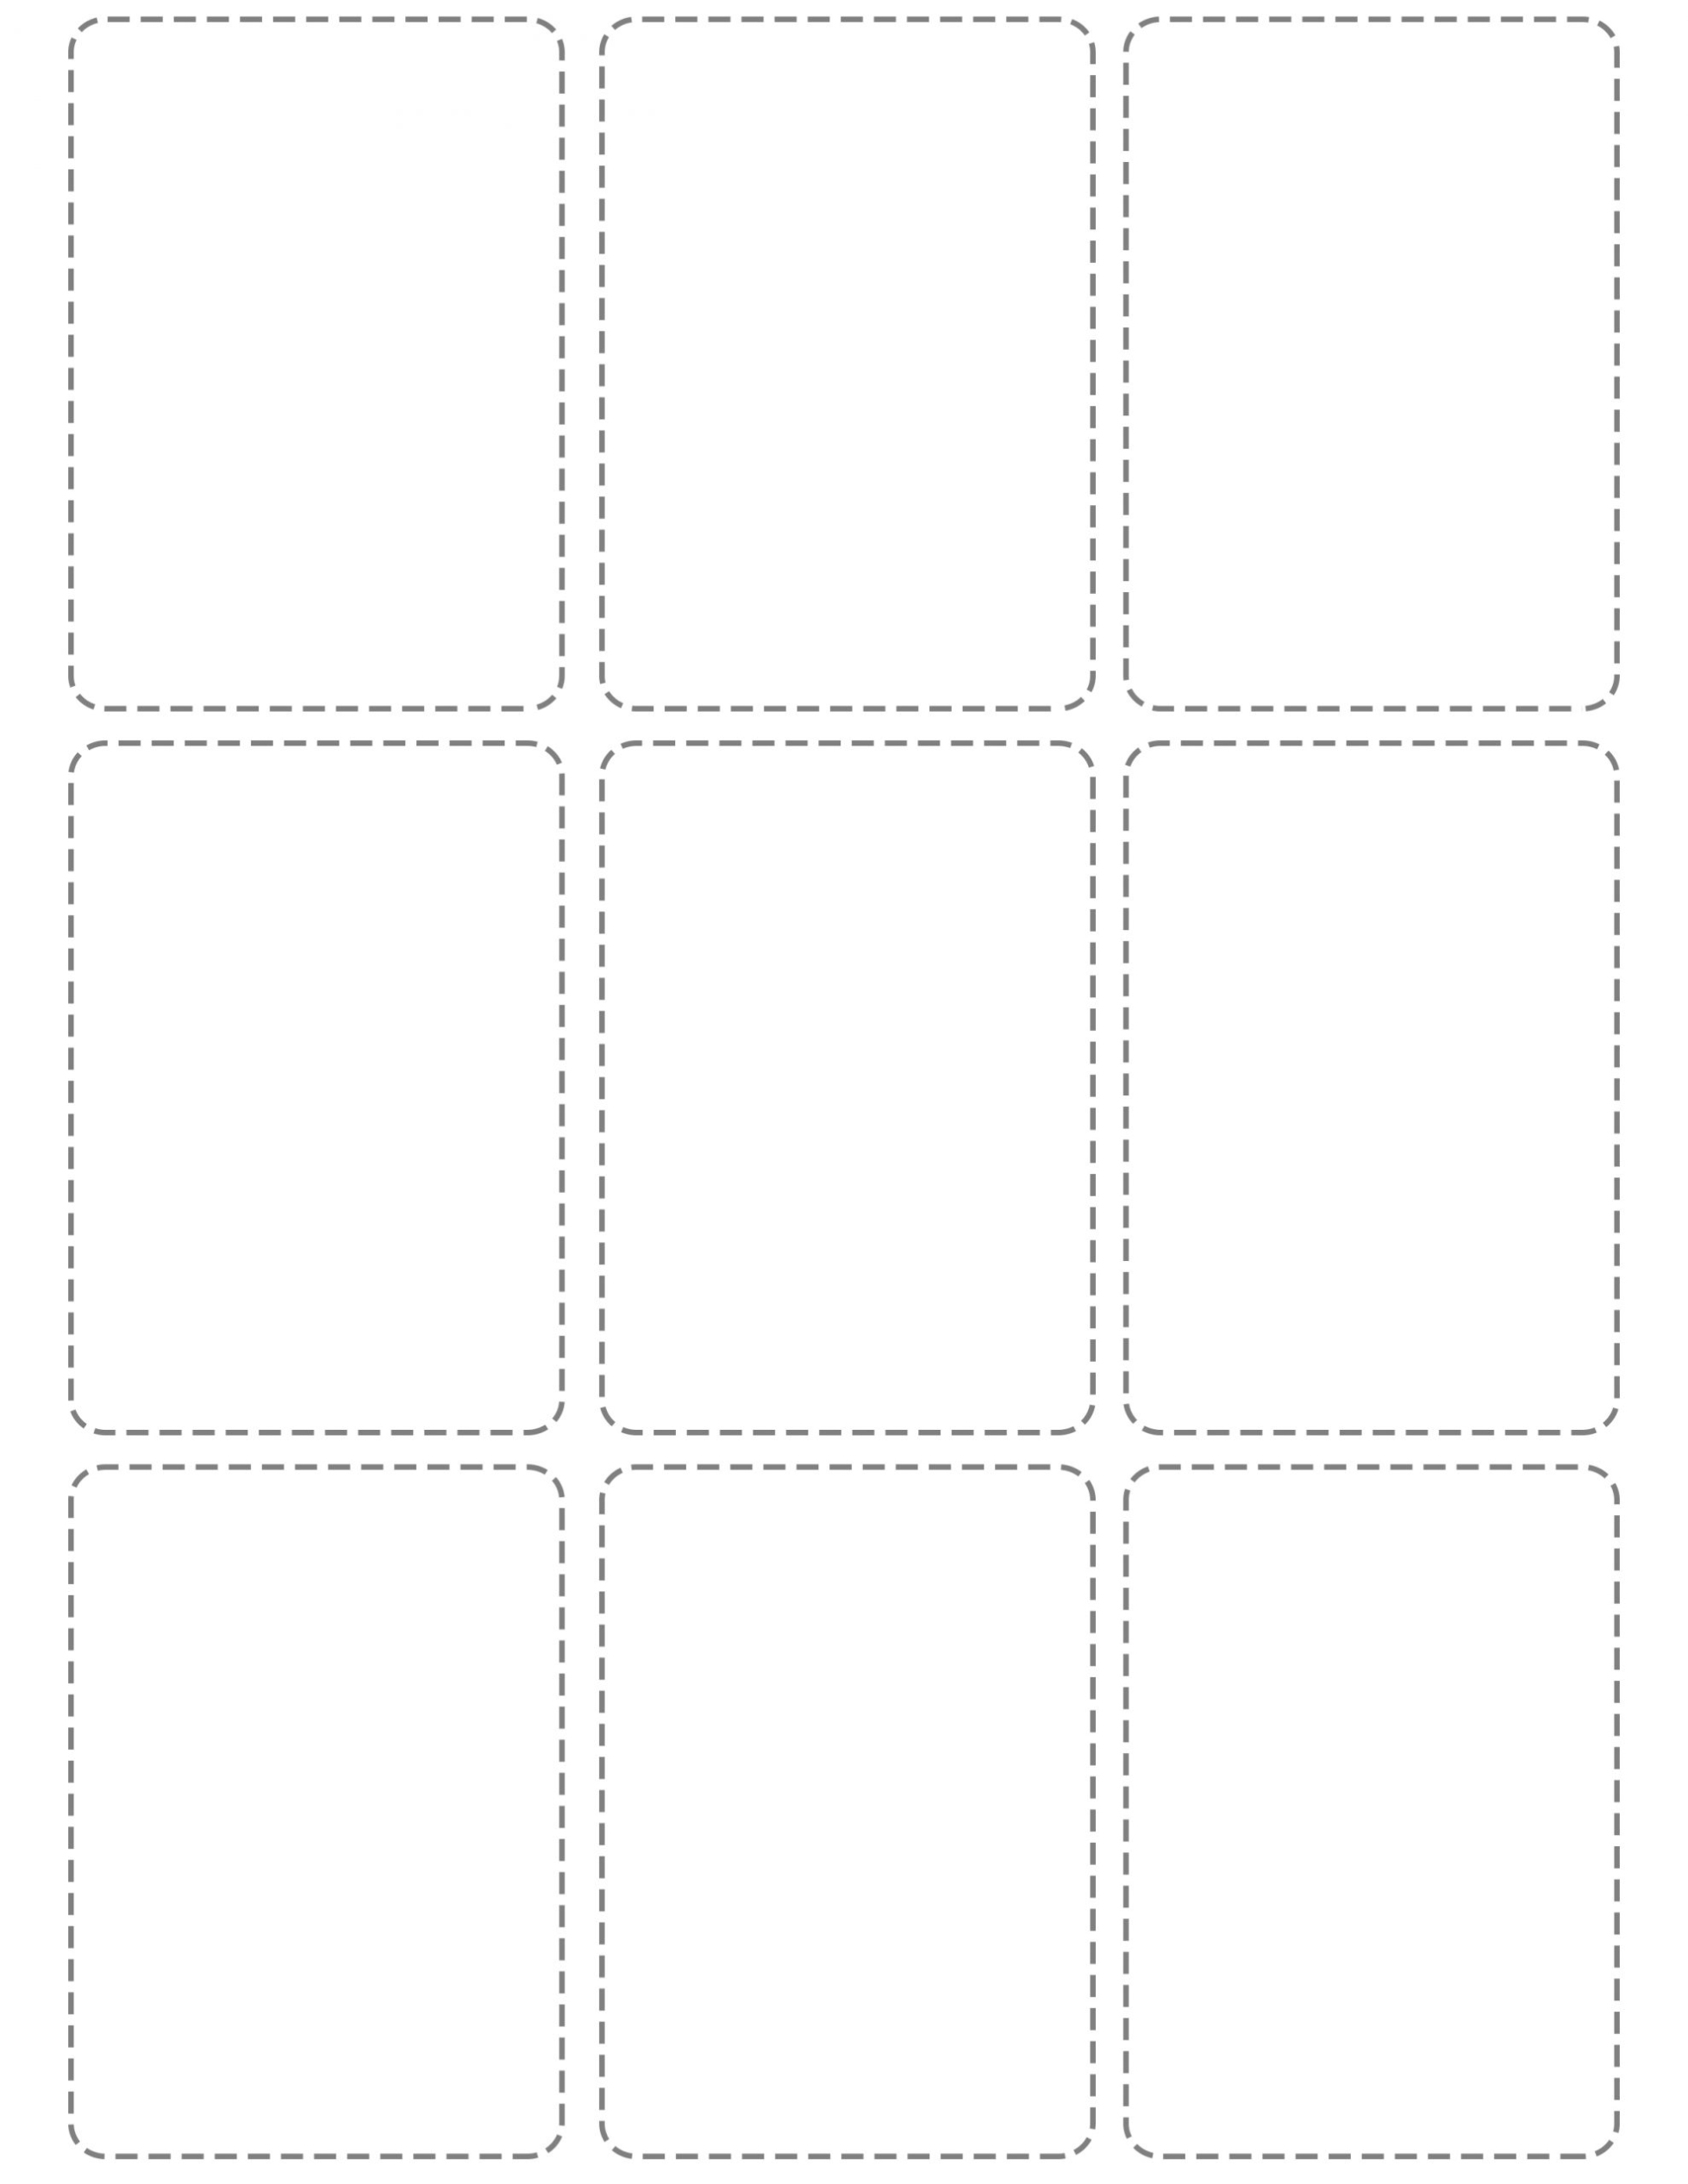 Standard Card Game Templates – Card Game Maker For Template For Game Cards